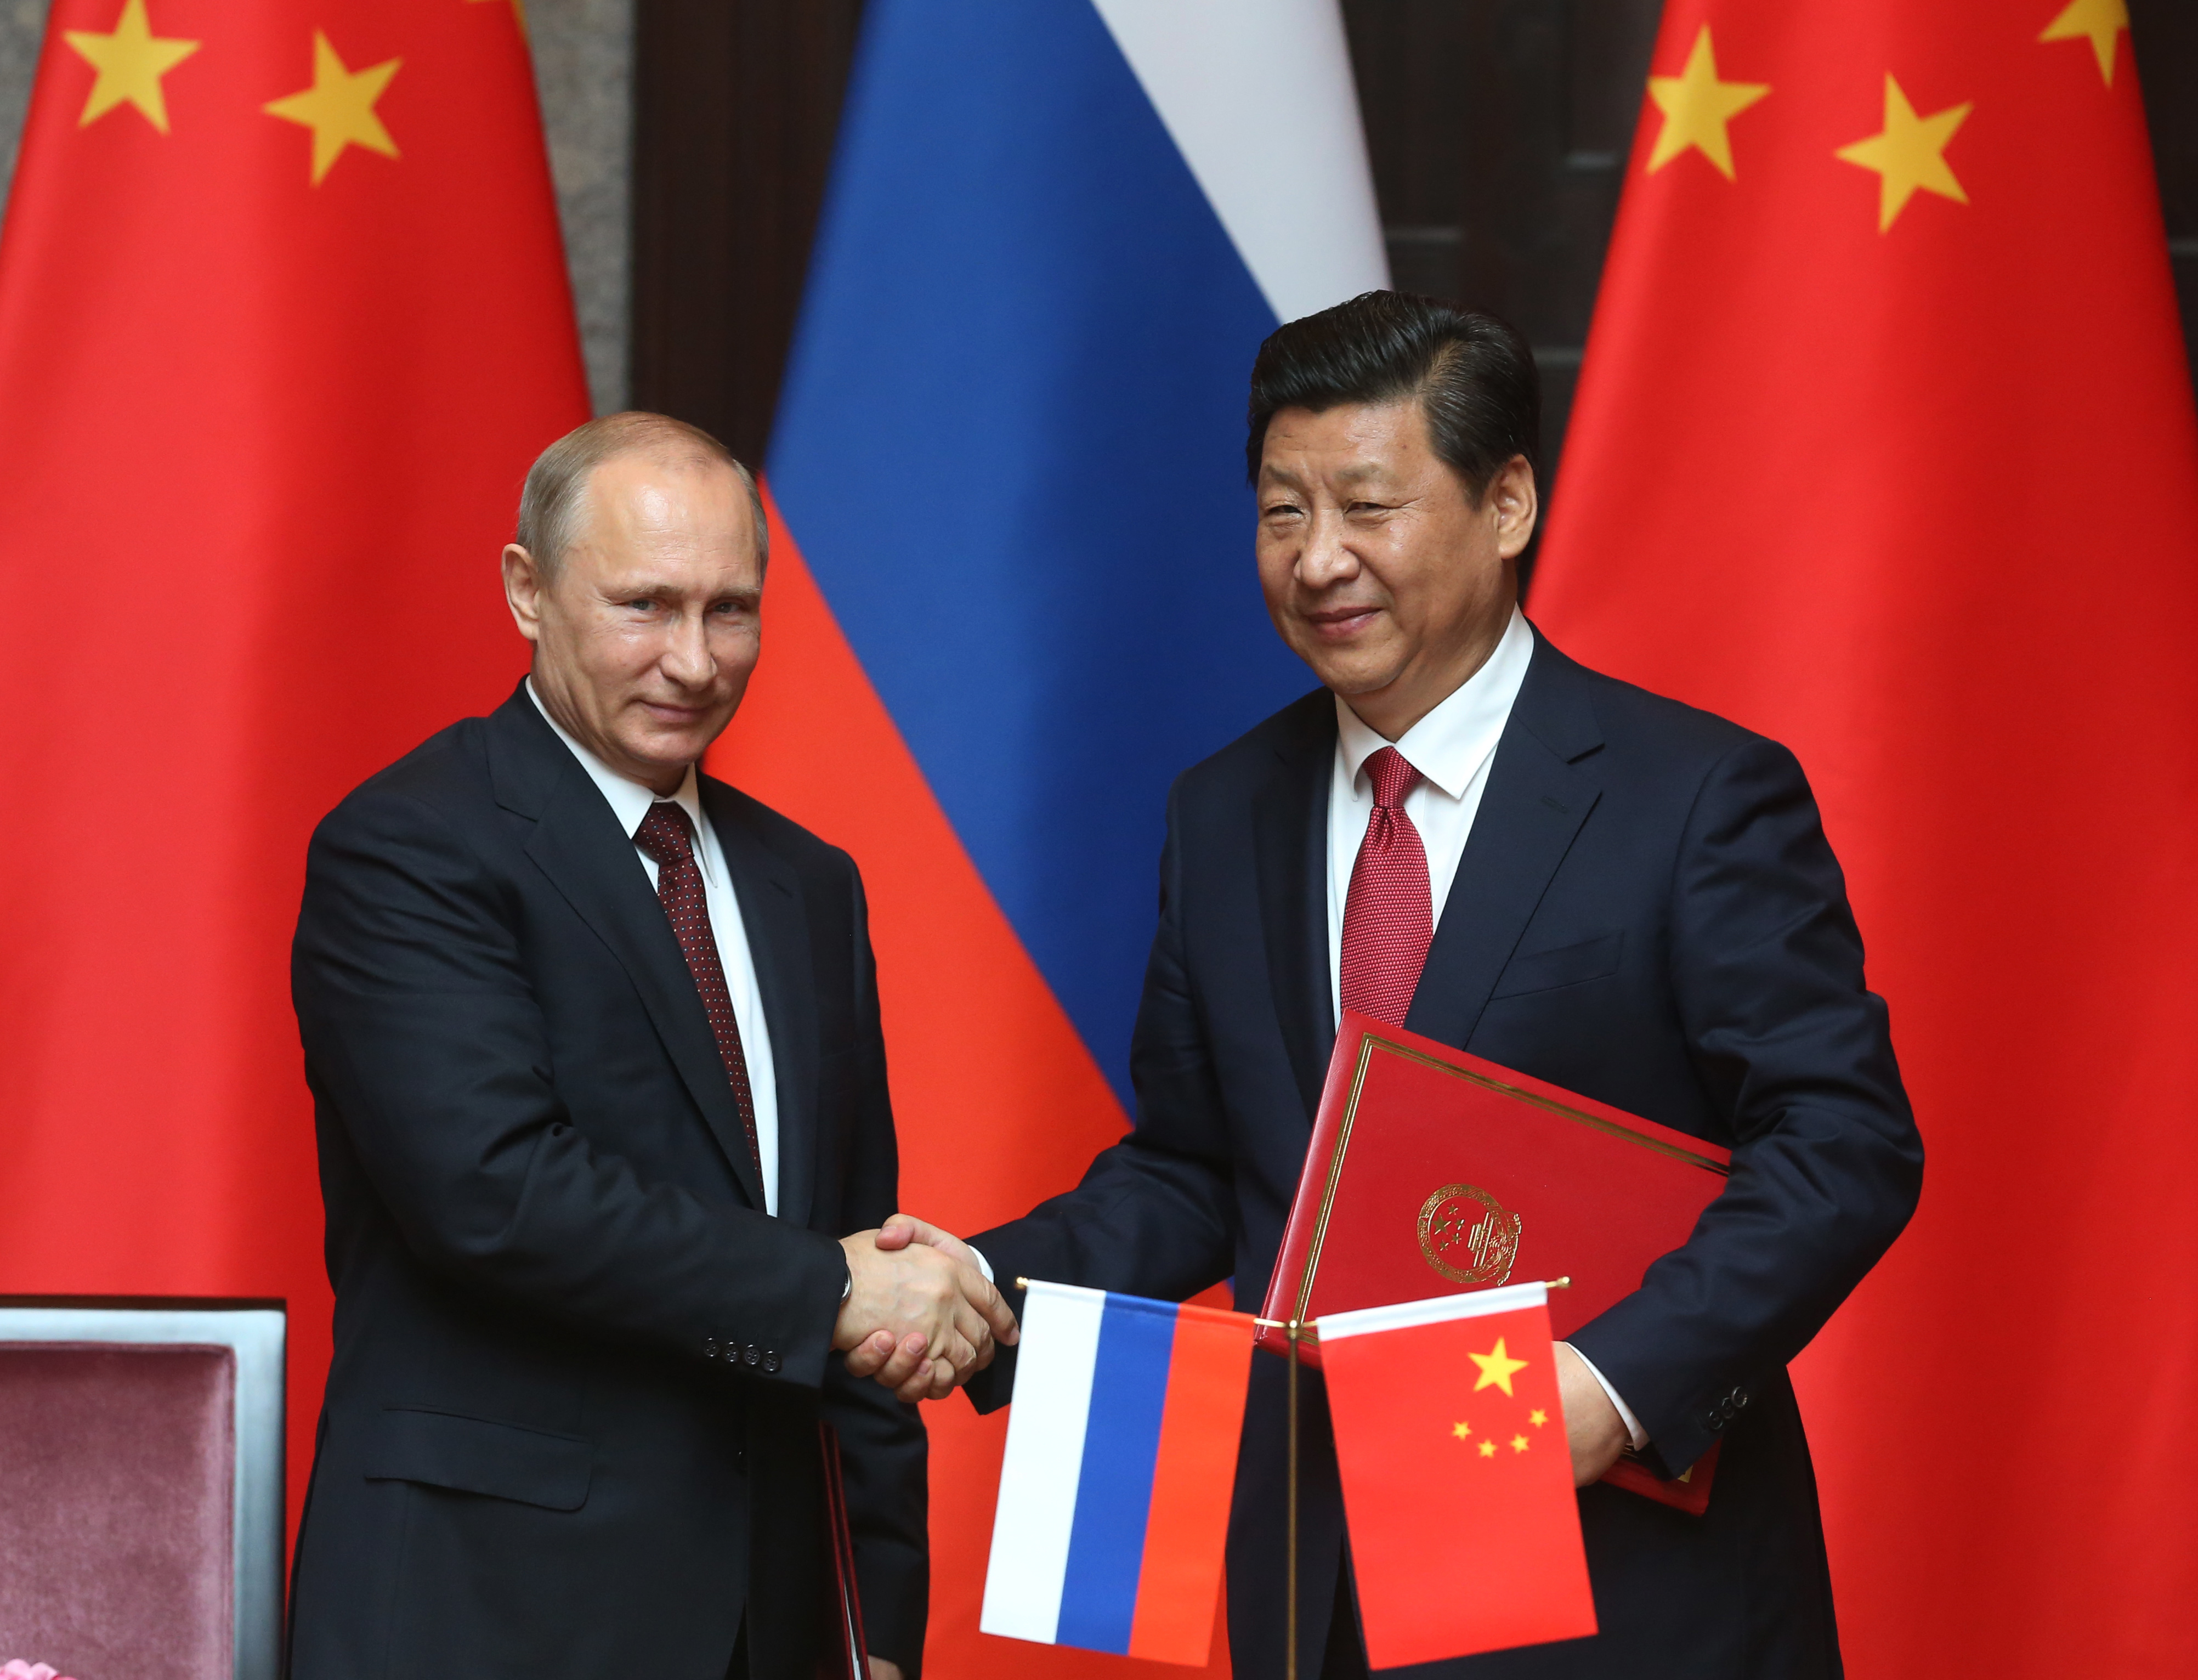 Russian President Vladimir Putin and Chinese President Xi Jingping attend a welcoming ceremony on May 20, 2014 in Shanghai.